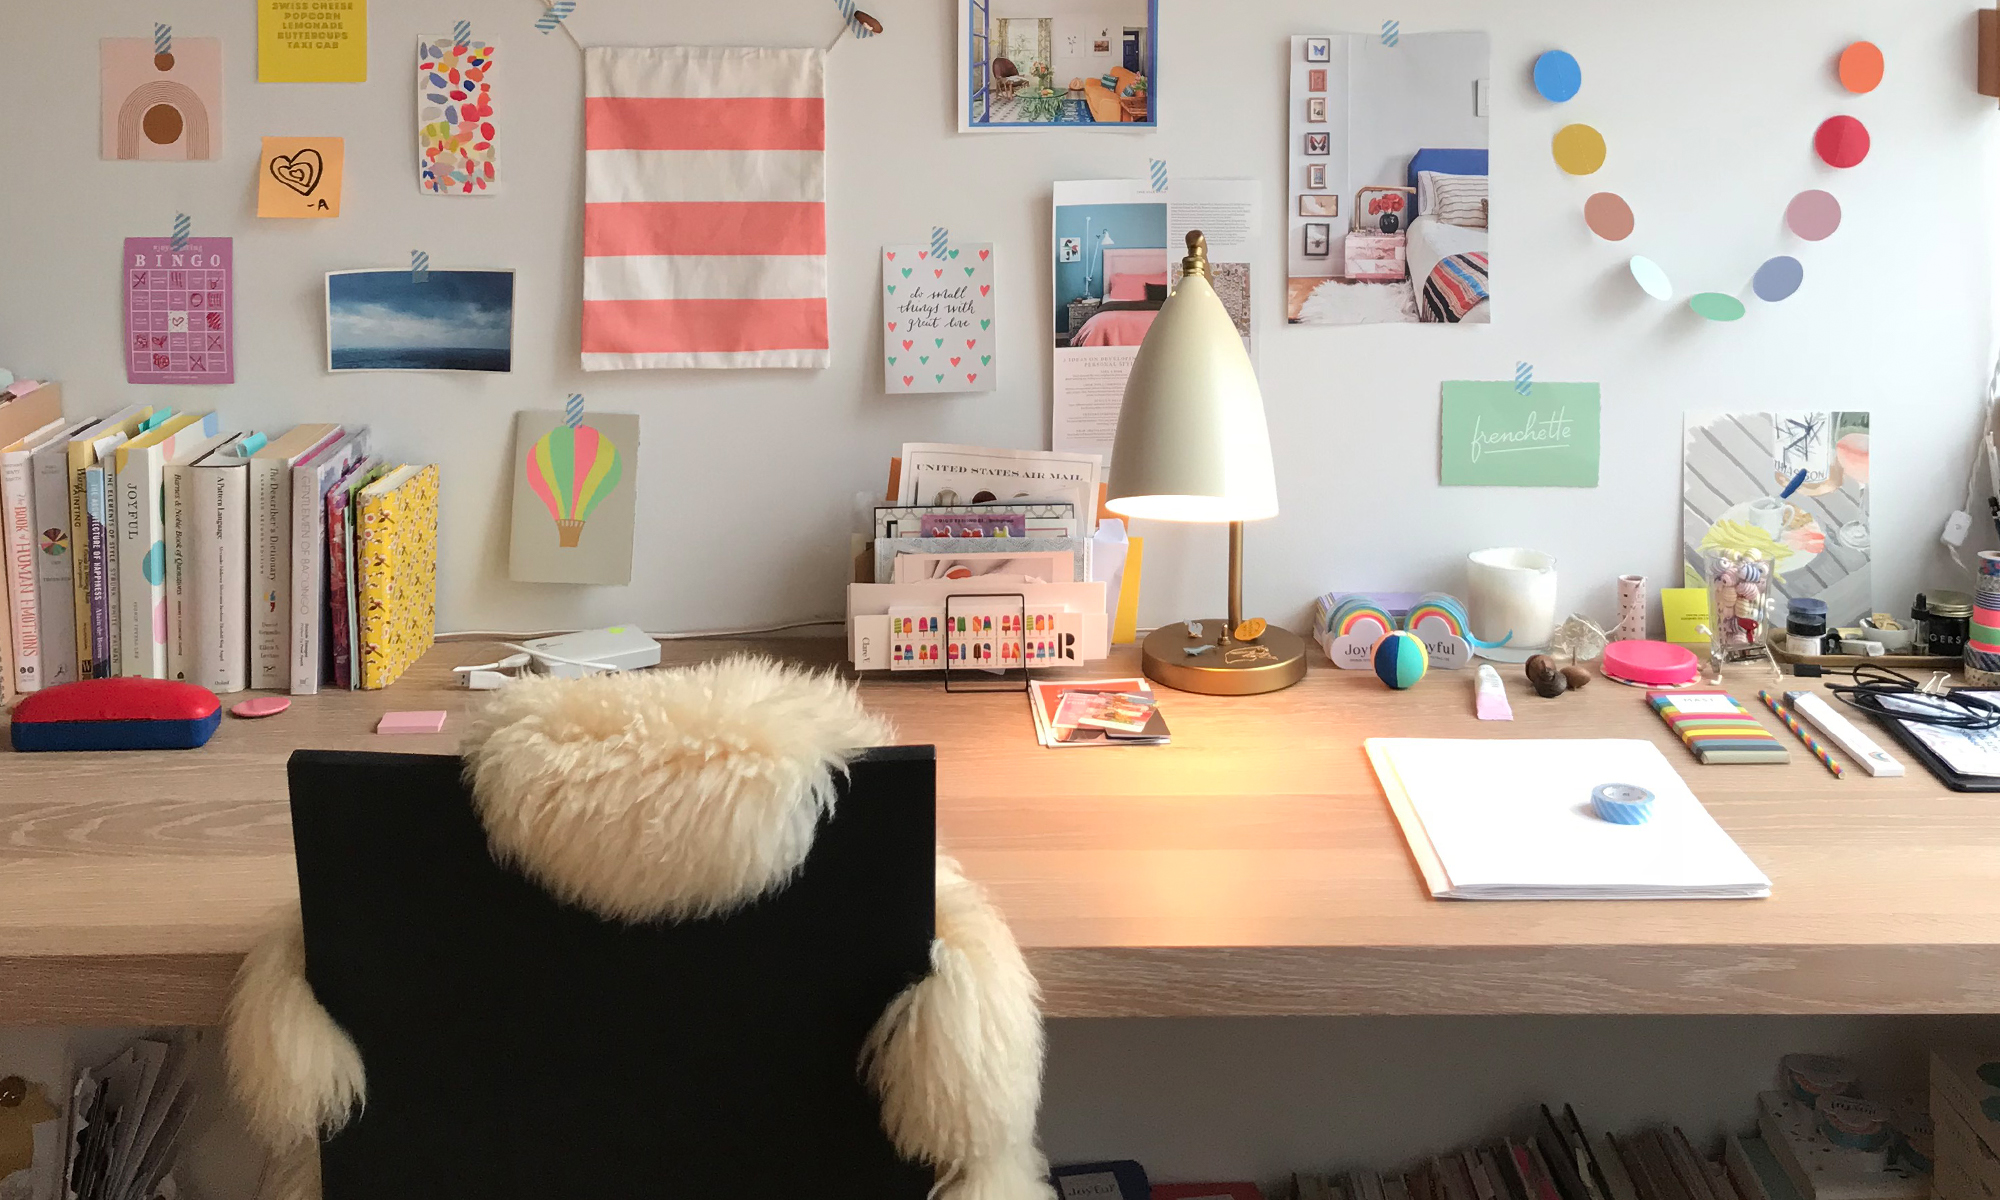 9 things you can do to make working from home more joyful